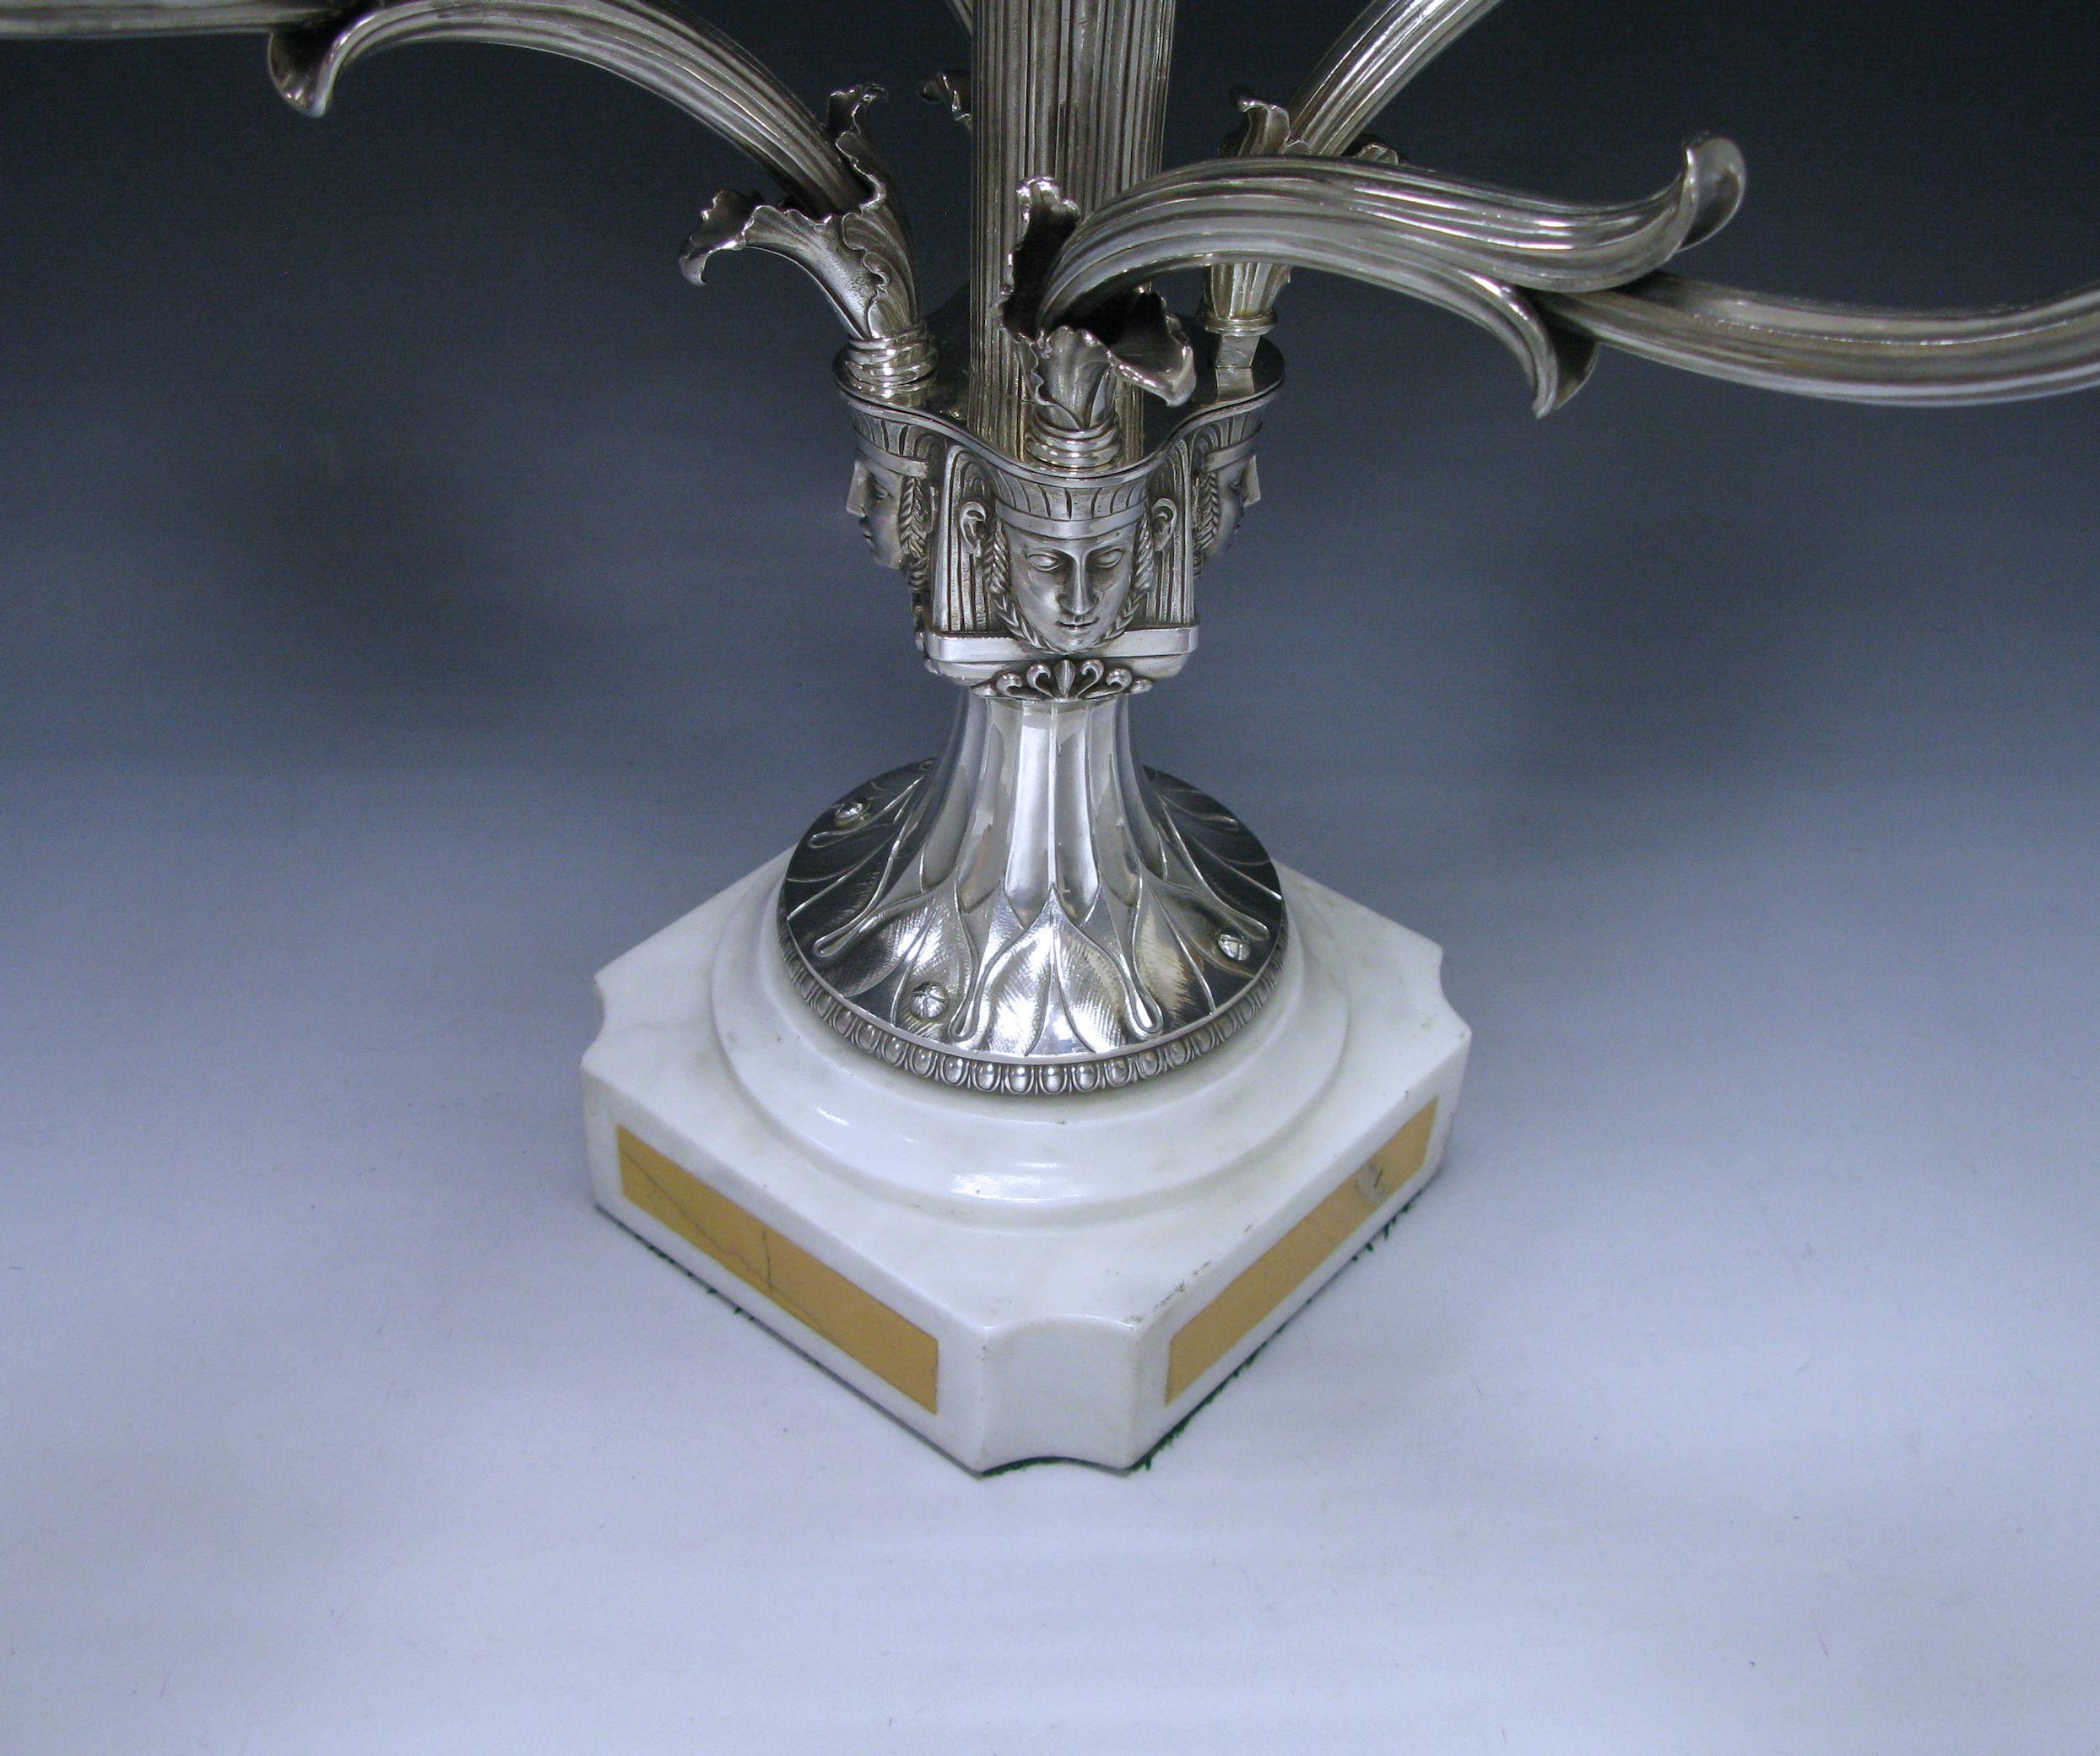 A George IV antique silver epergne centerpiece, having a central bowl for sweets or fruit and four braches for candlesticks. The centrepiece stands on a marble base. The central column emerges from four Egyptian heads which in turn, the removable